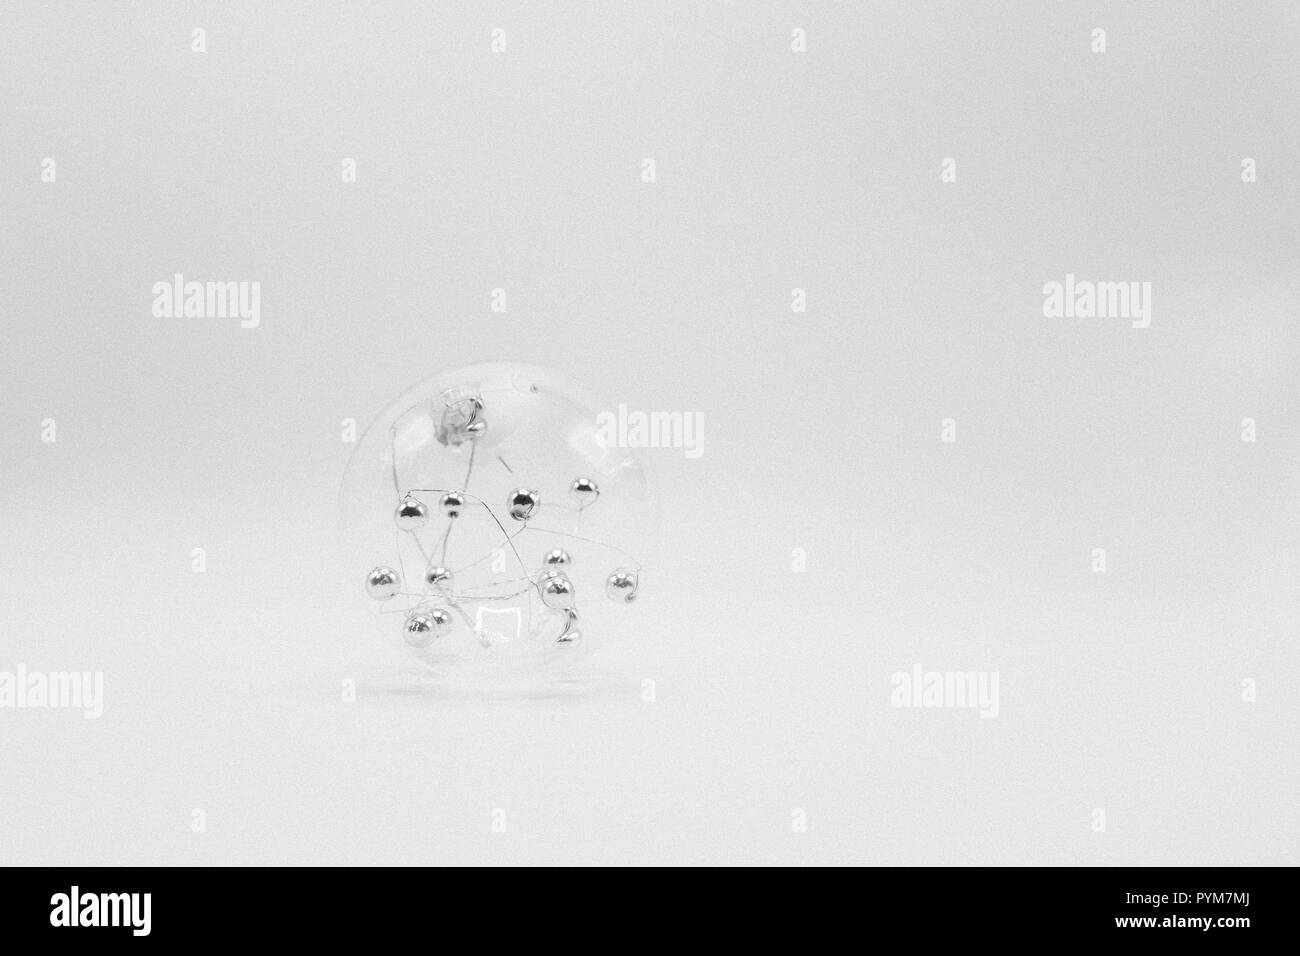 Monochrome Elegant Christmas Wallpaper Background Of Tree Decorations Classy Holidays Image In Black And White Stock Photo Alamy